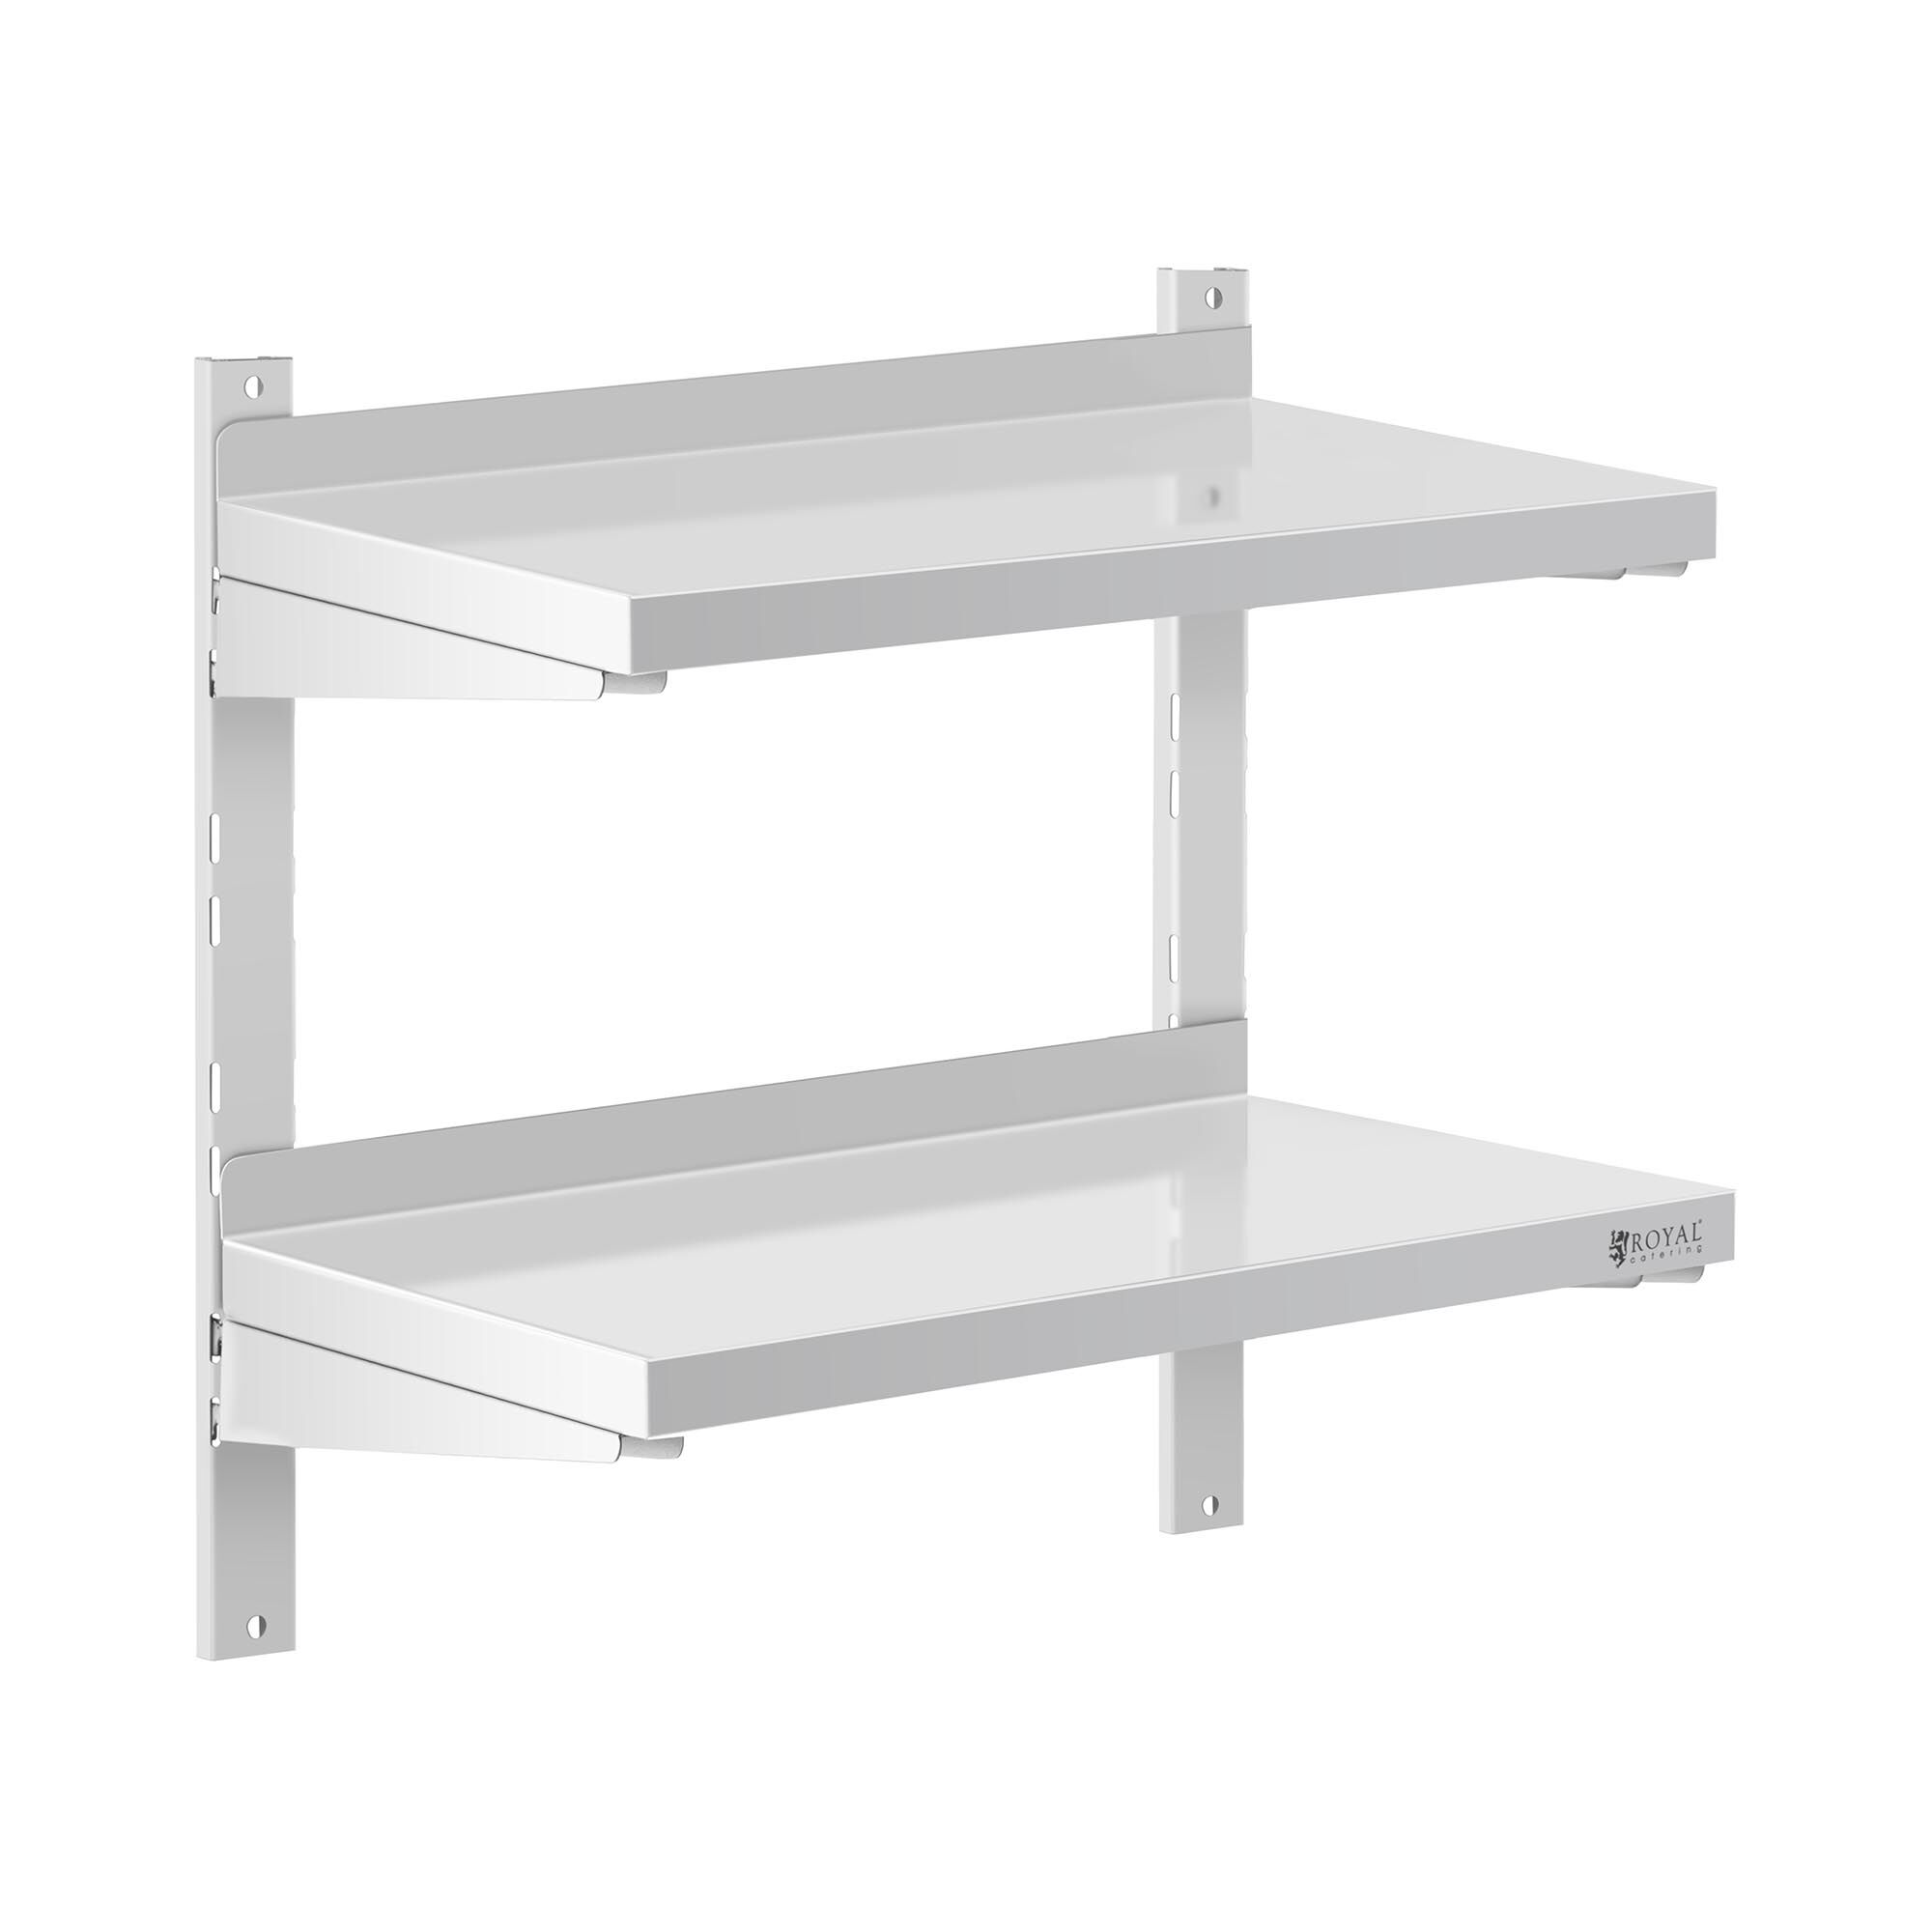 Royal Catering Stainless Steel Wall Shelf - 2 shelves - 30 x 60 cm